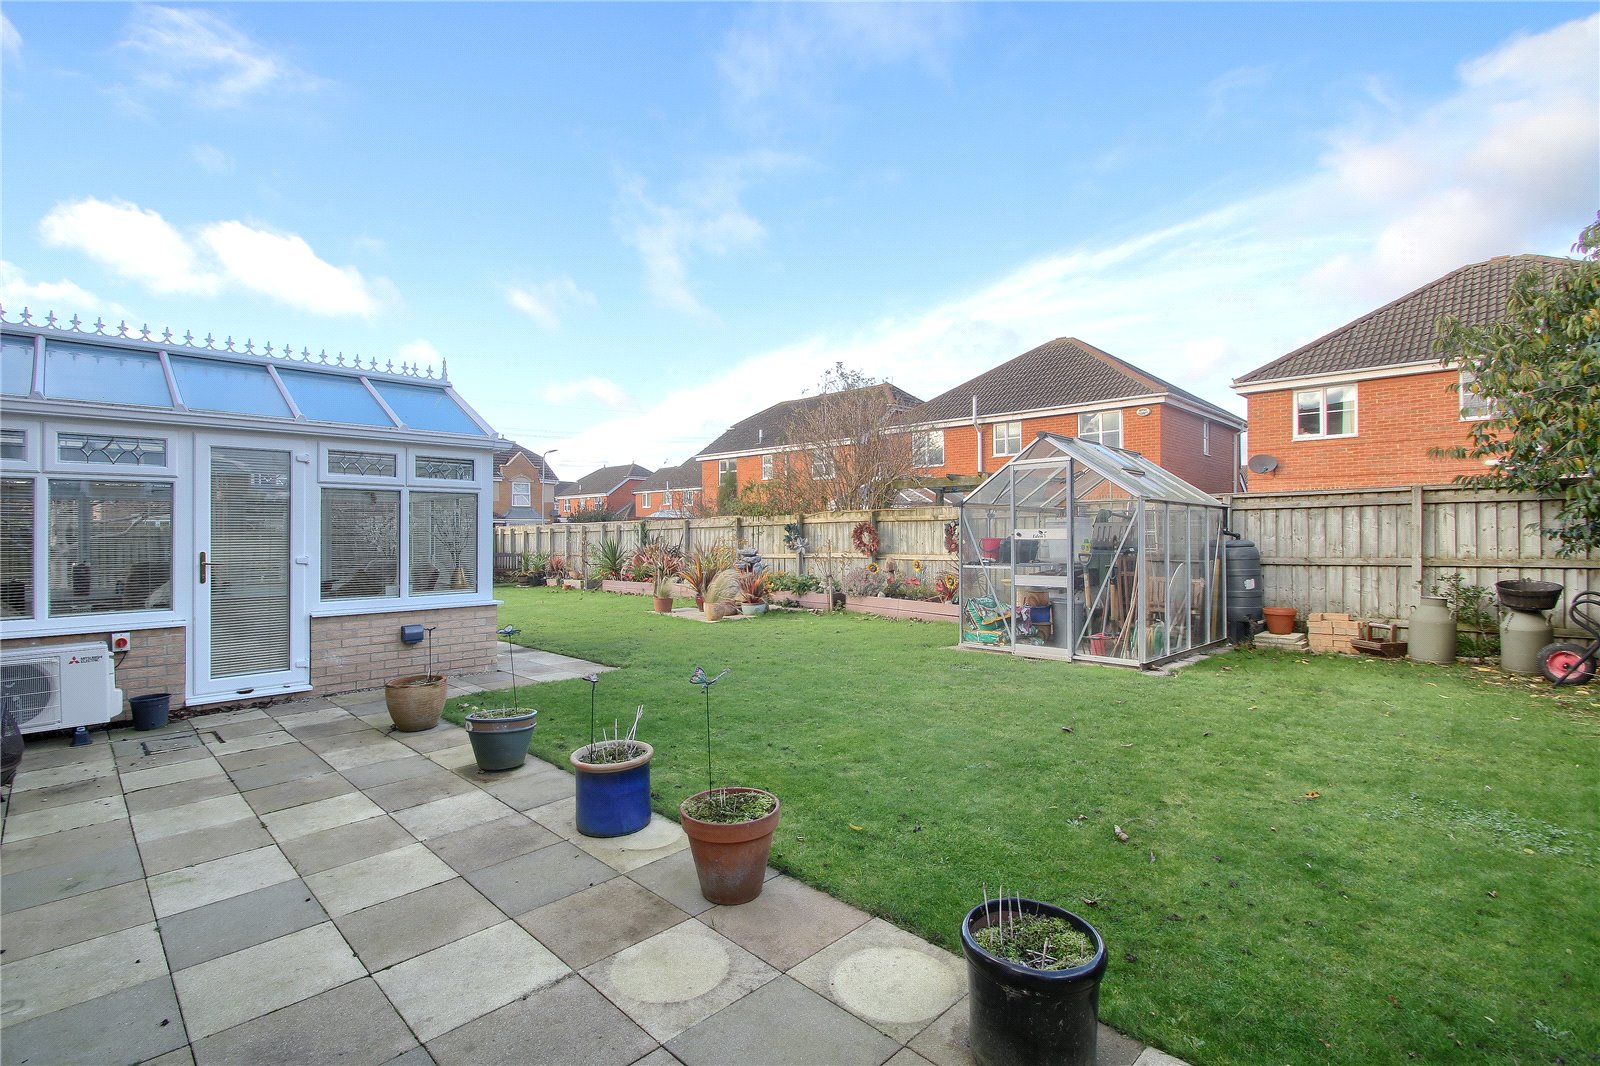 4 bed house for sale in Chaldron Way, Eaglescliffe 2